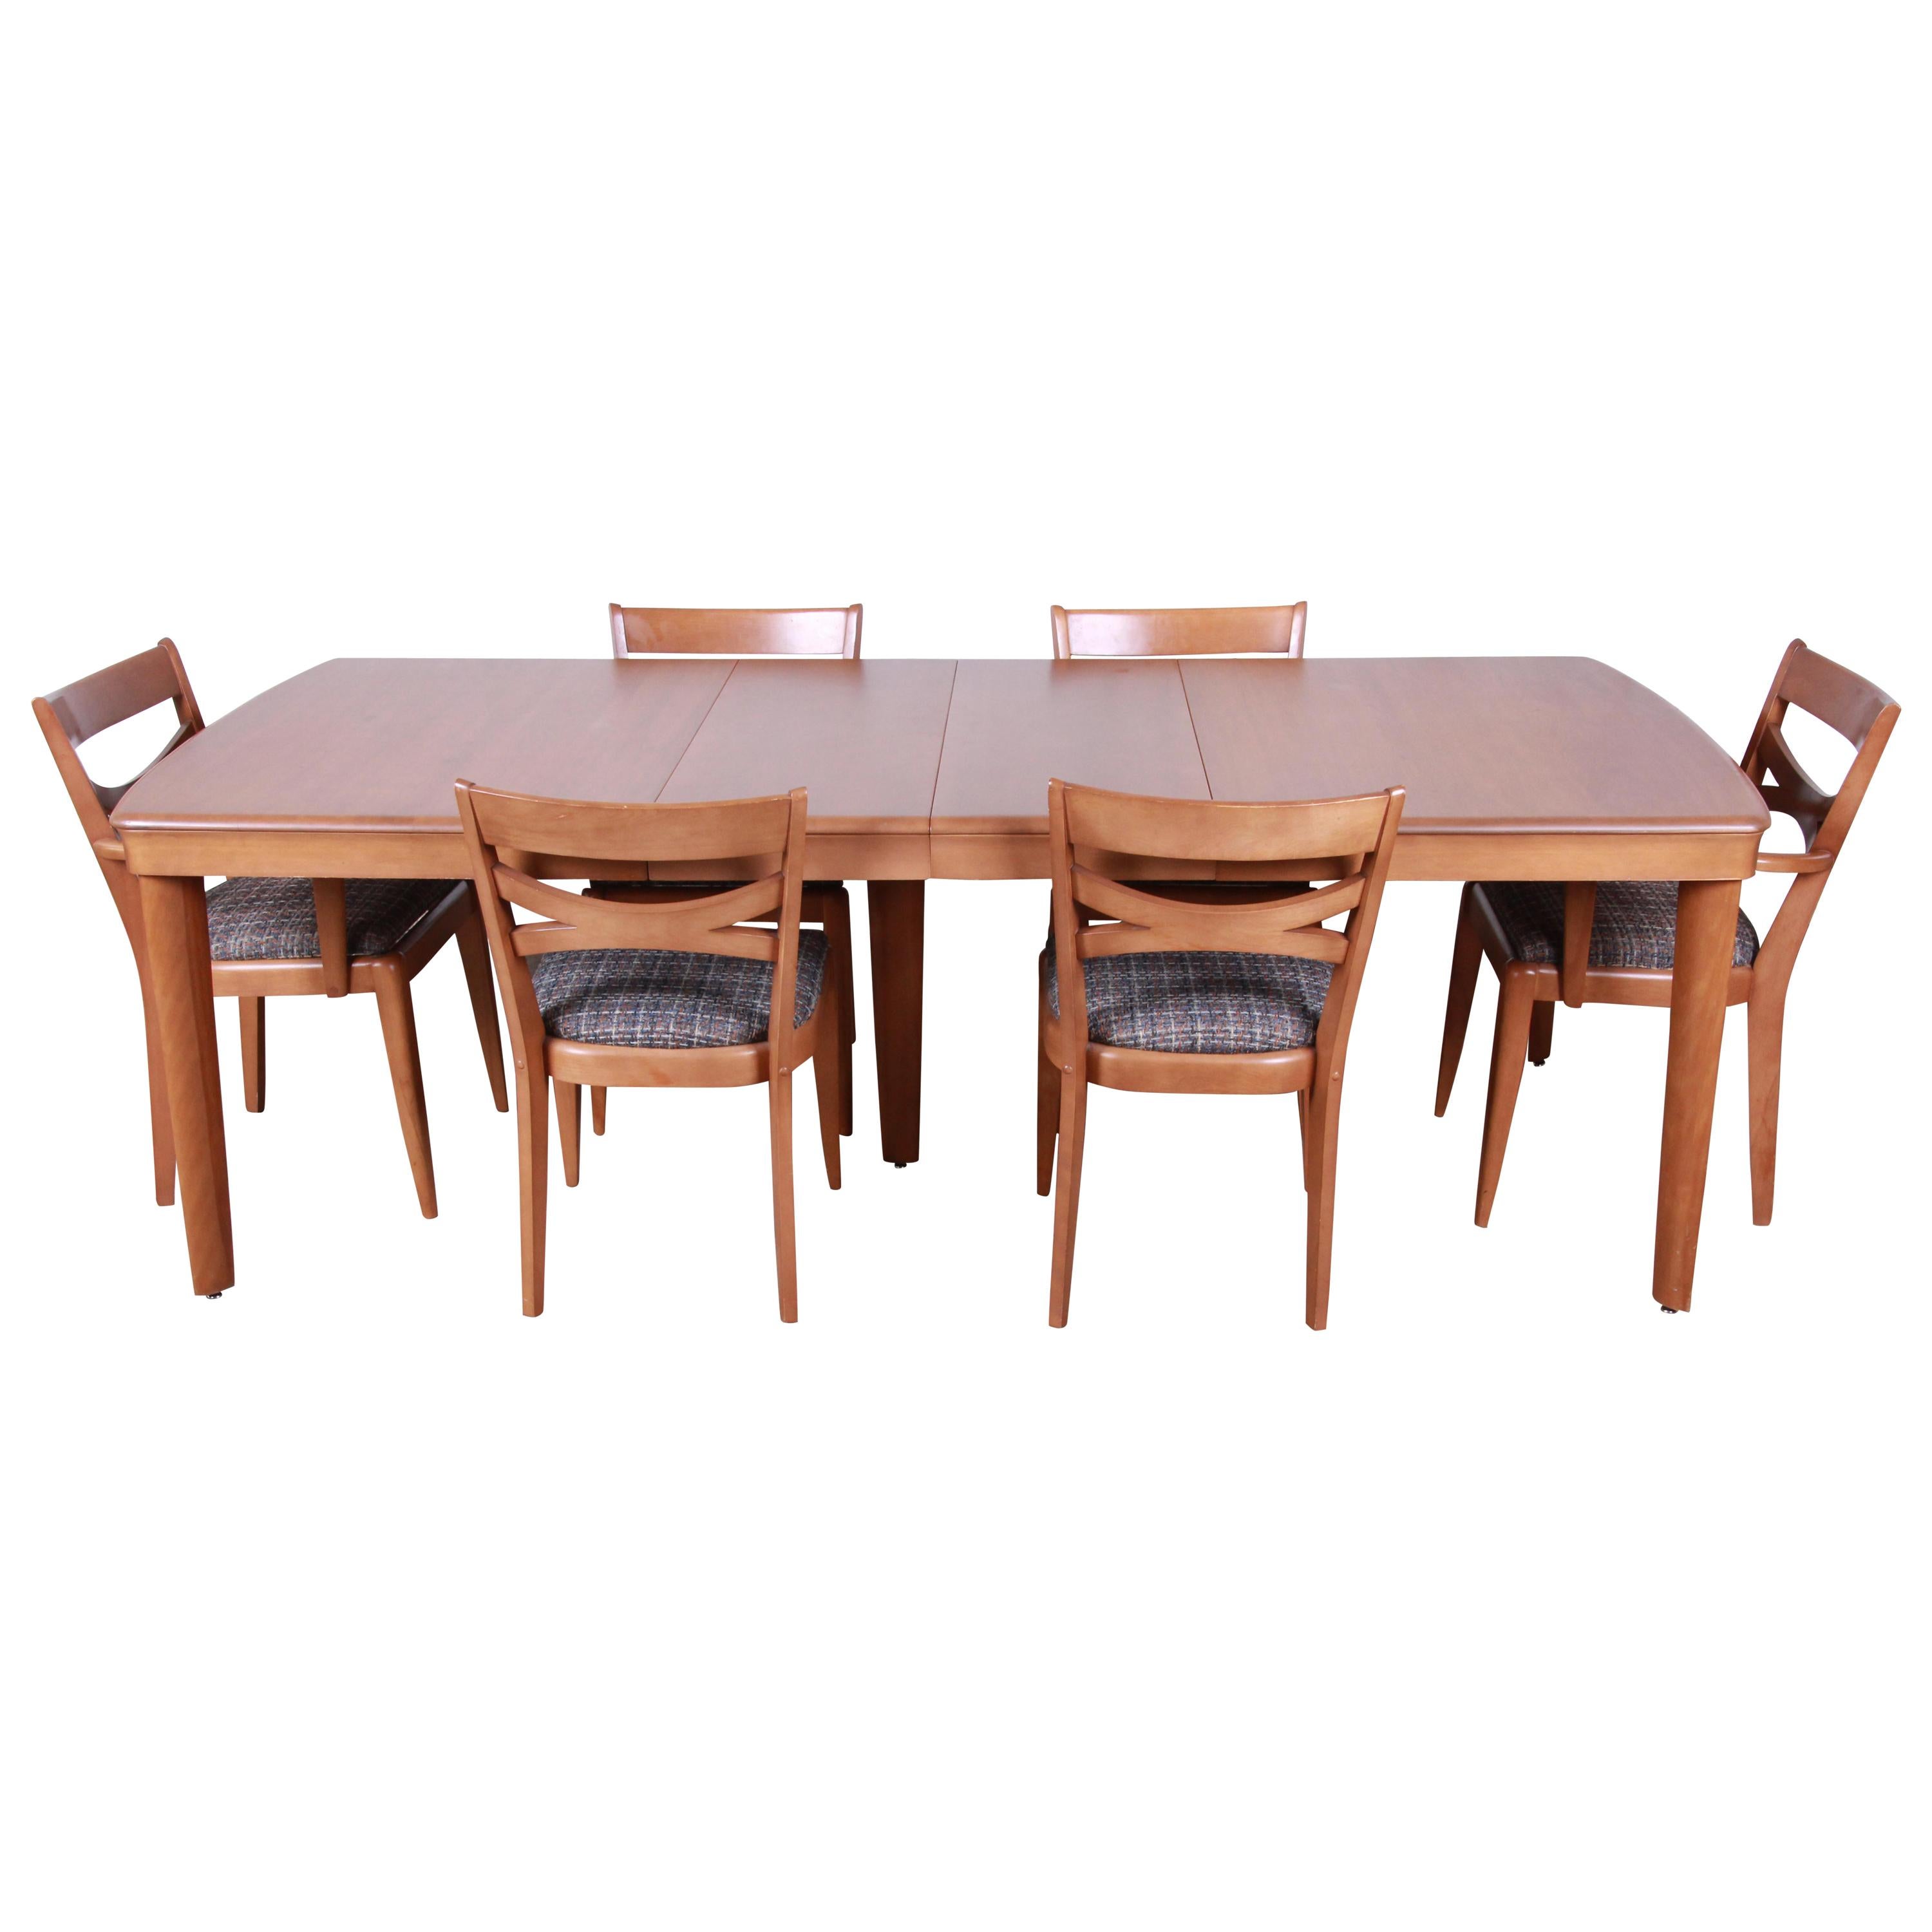 Heywood Wakefield Mid-Century Modern Extension Dining Table and Chairs